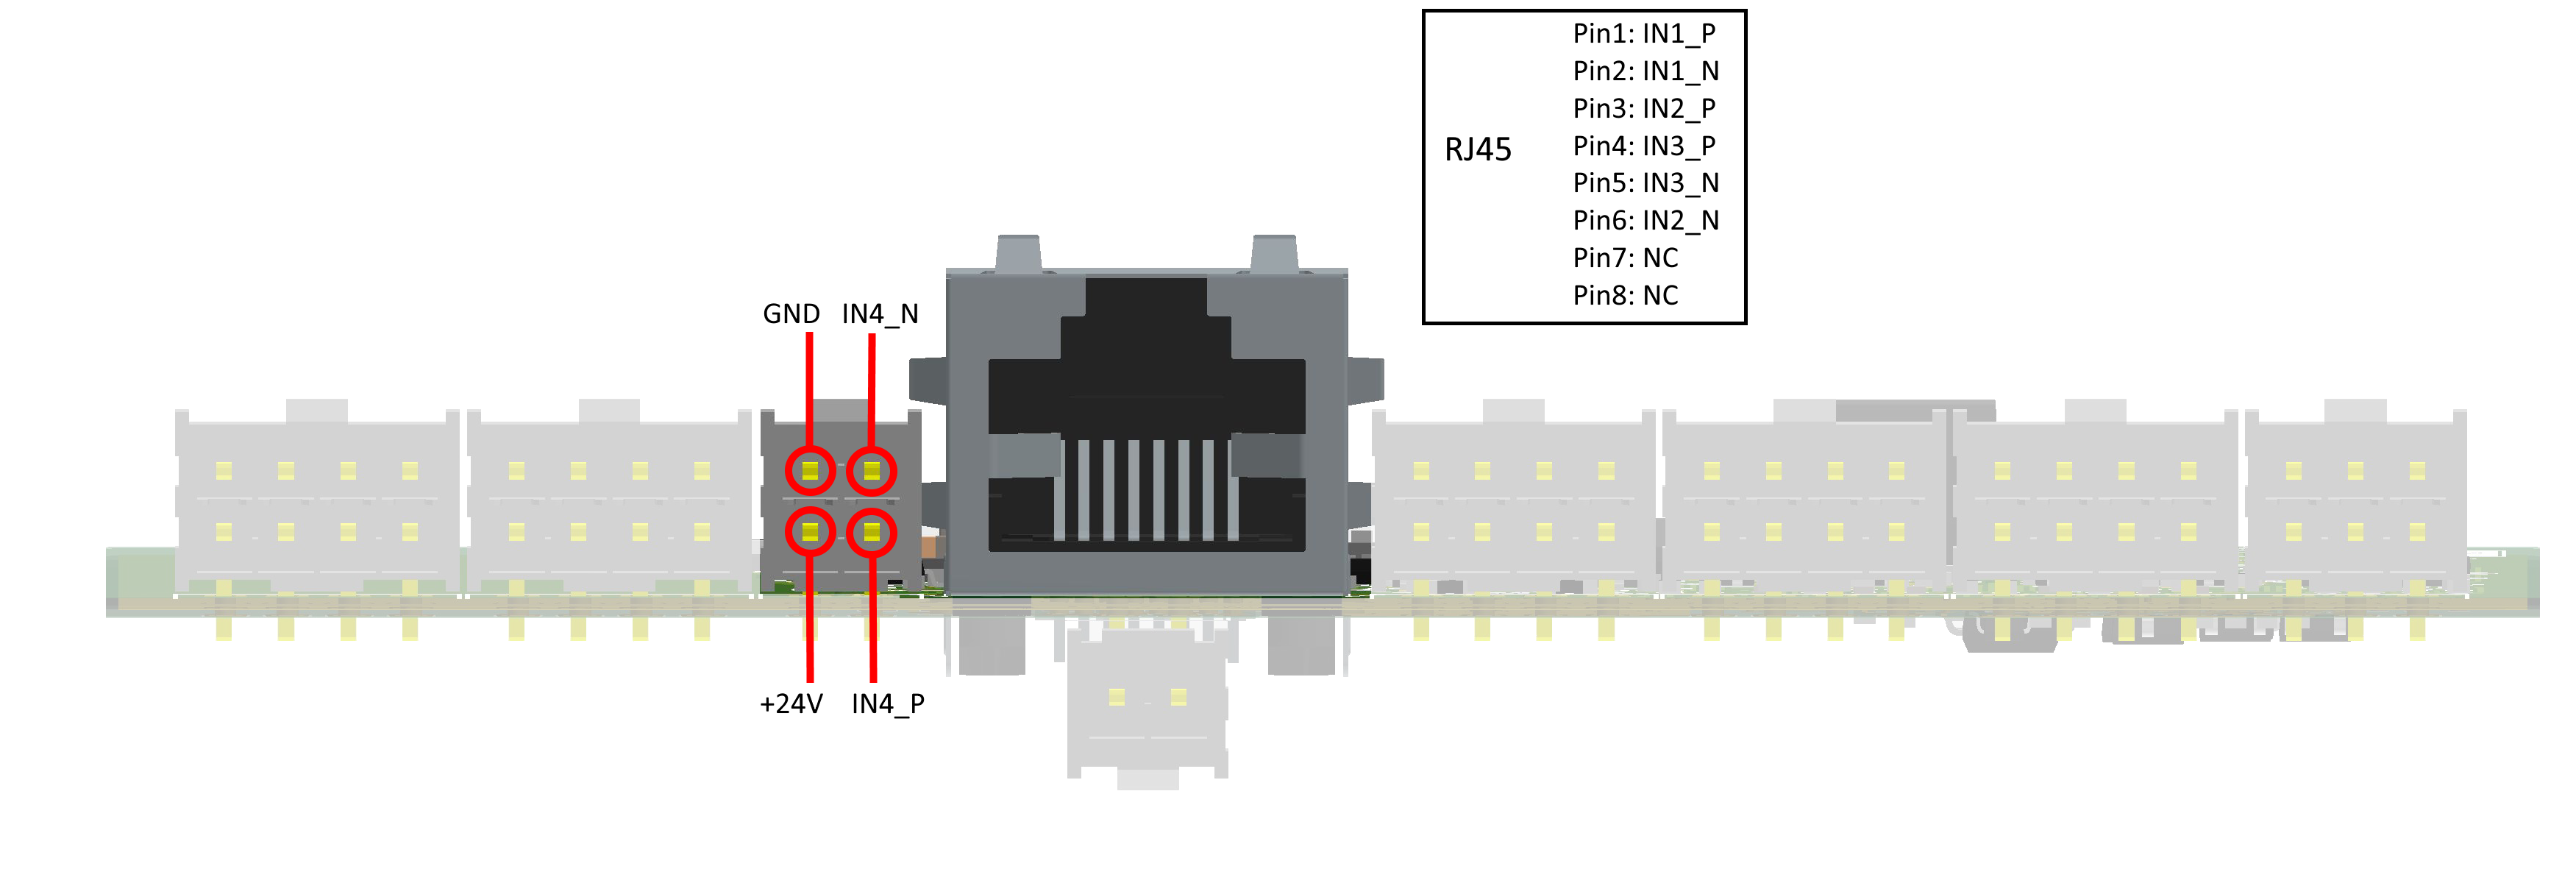 ../../../_images/3D_View_Connectors_Analog_Hall.png